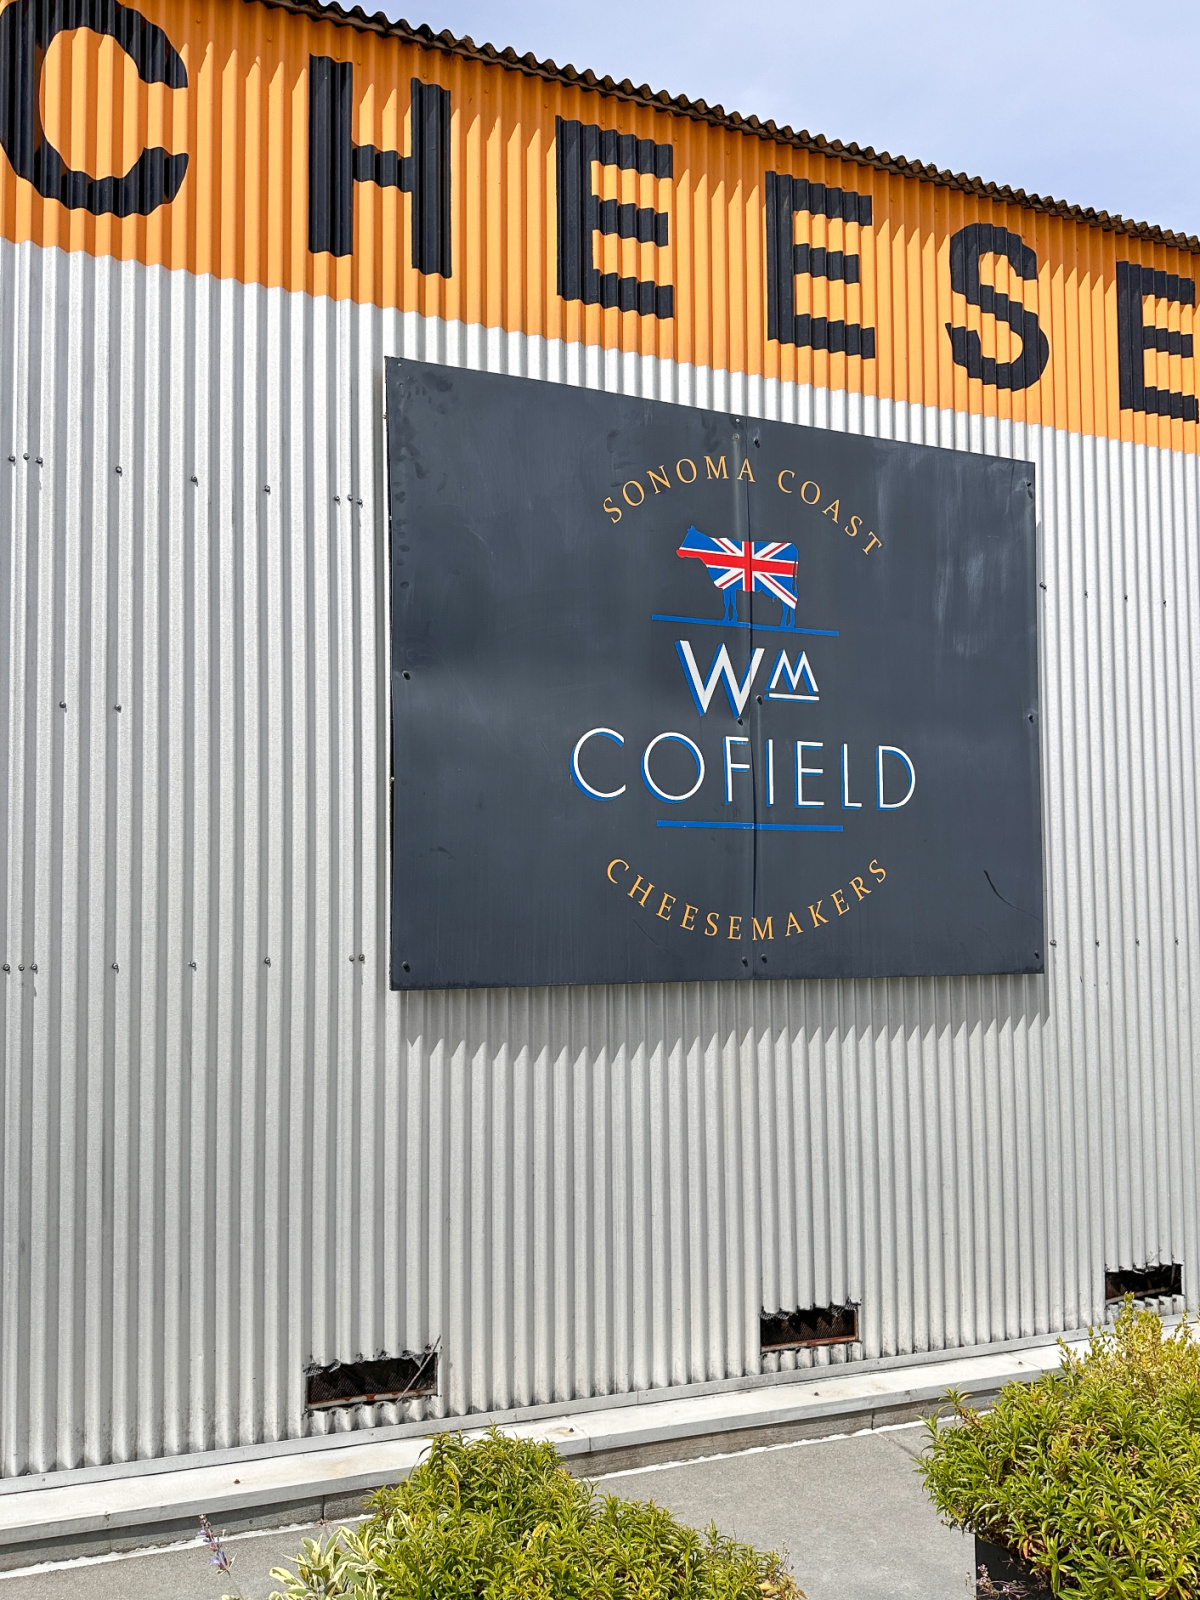 Sign for Wm Cofield Cheese shop at The Barlow.